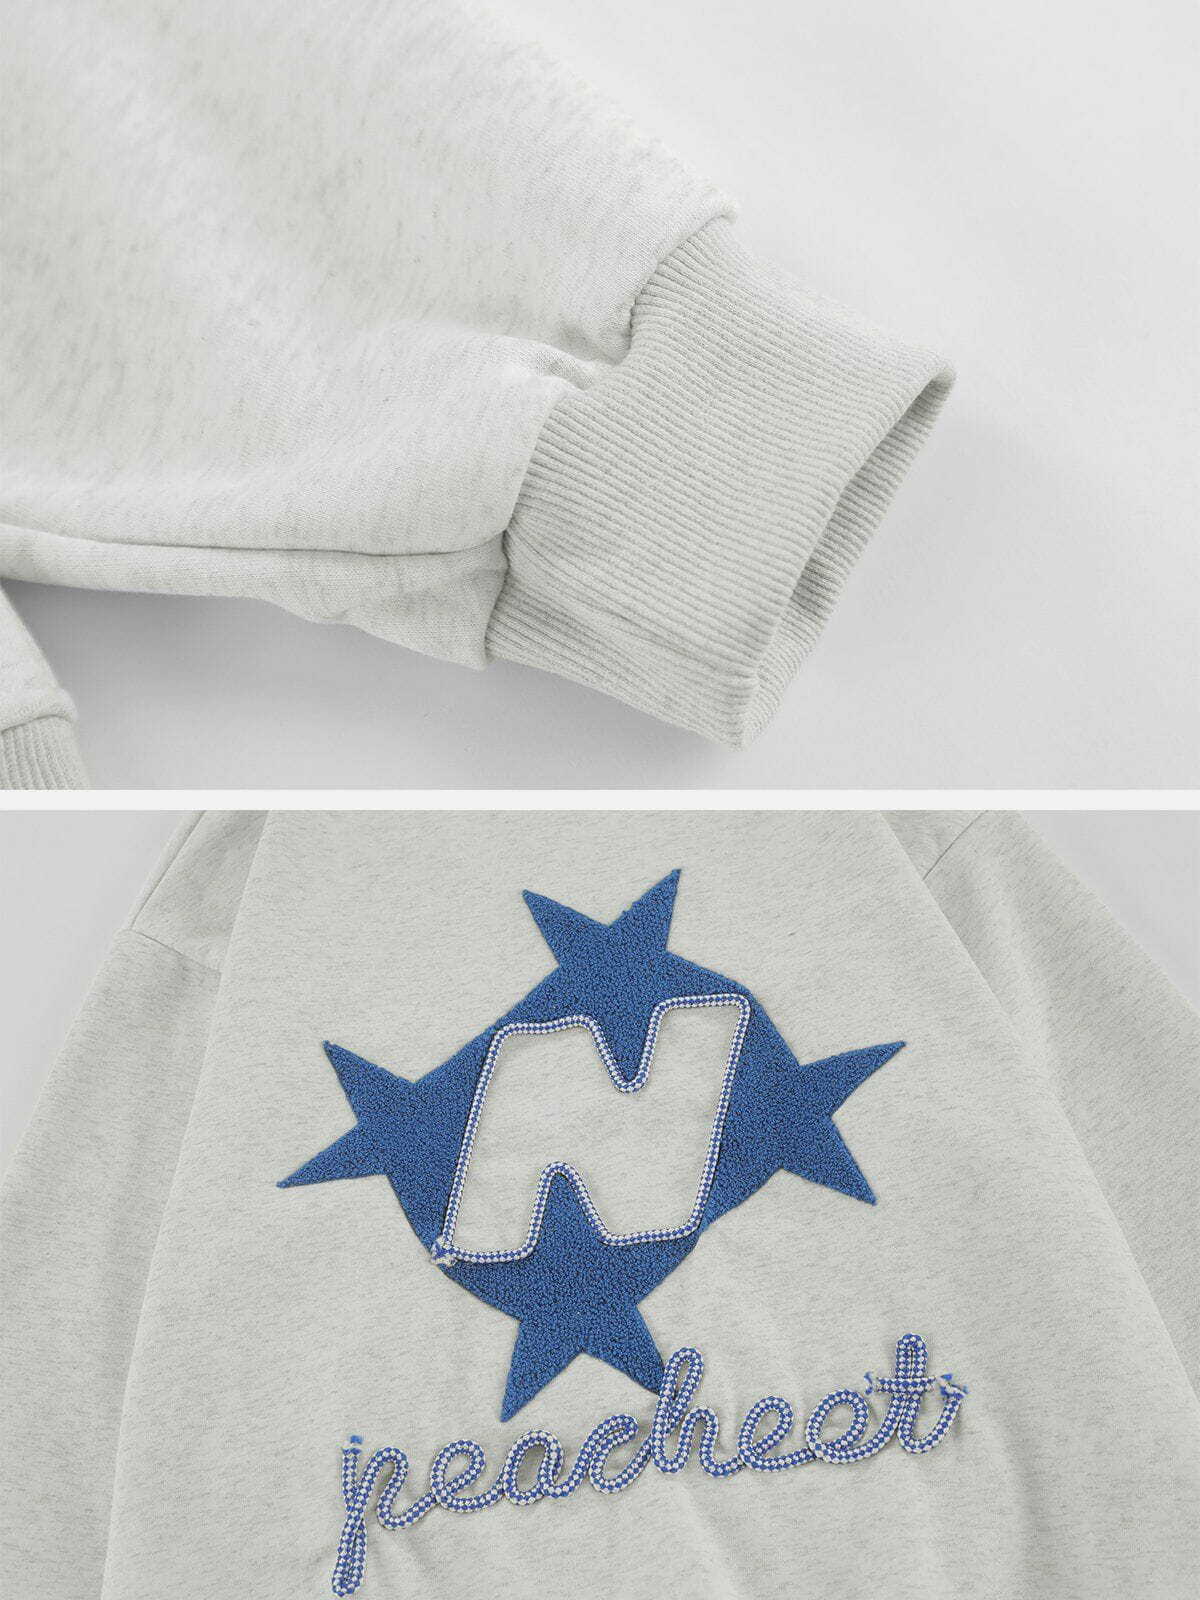 embroidered star sweatshirt quirky & y2k chic 3271